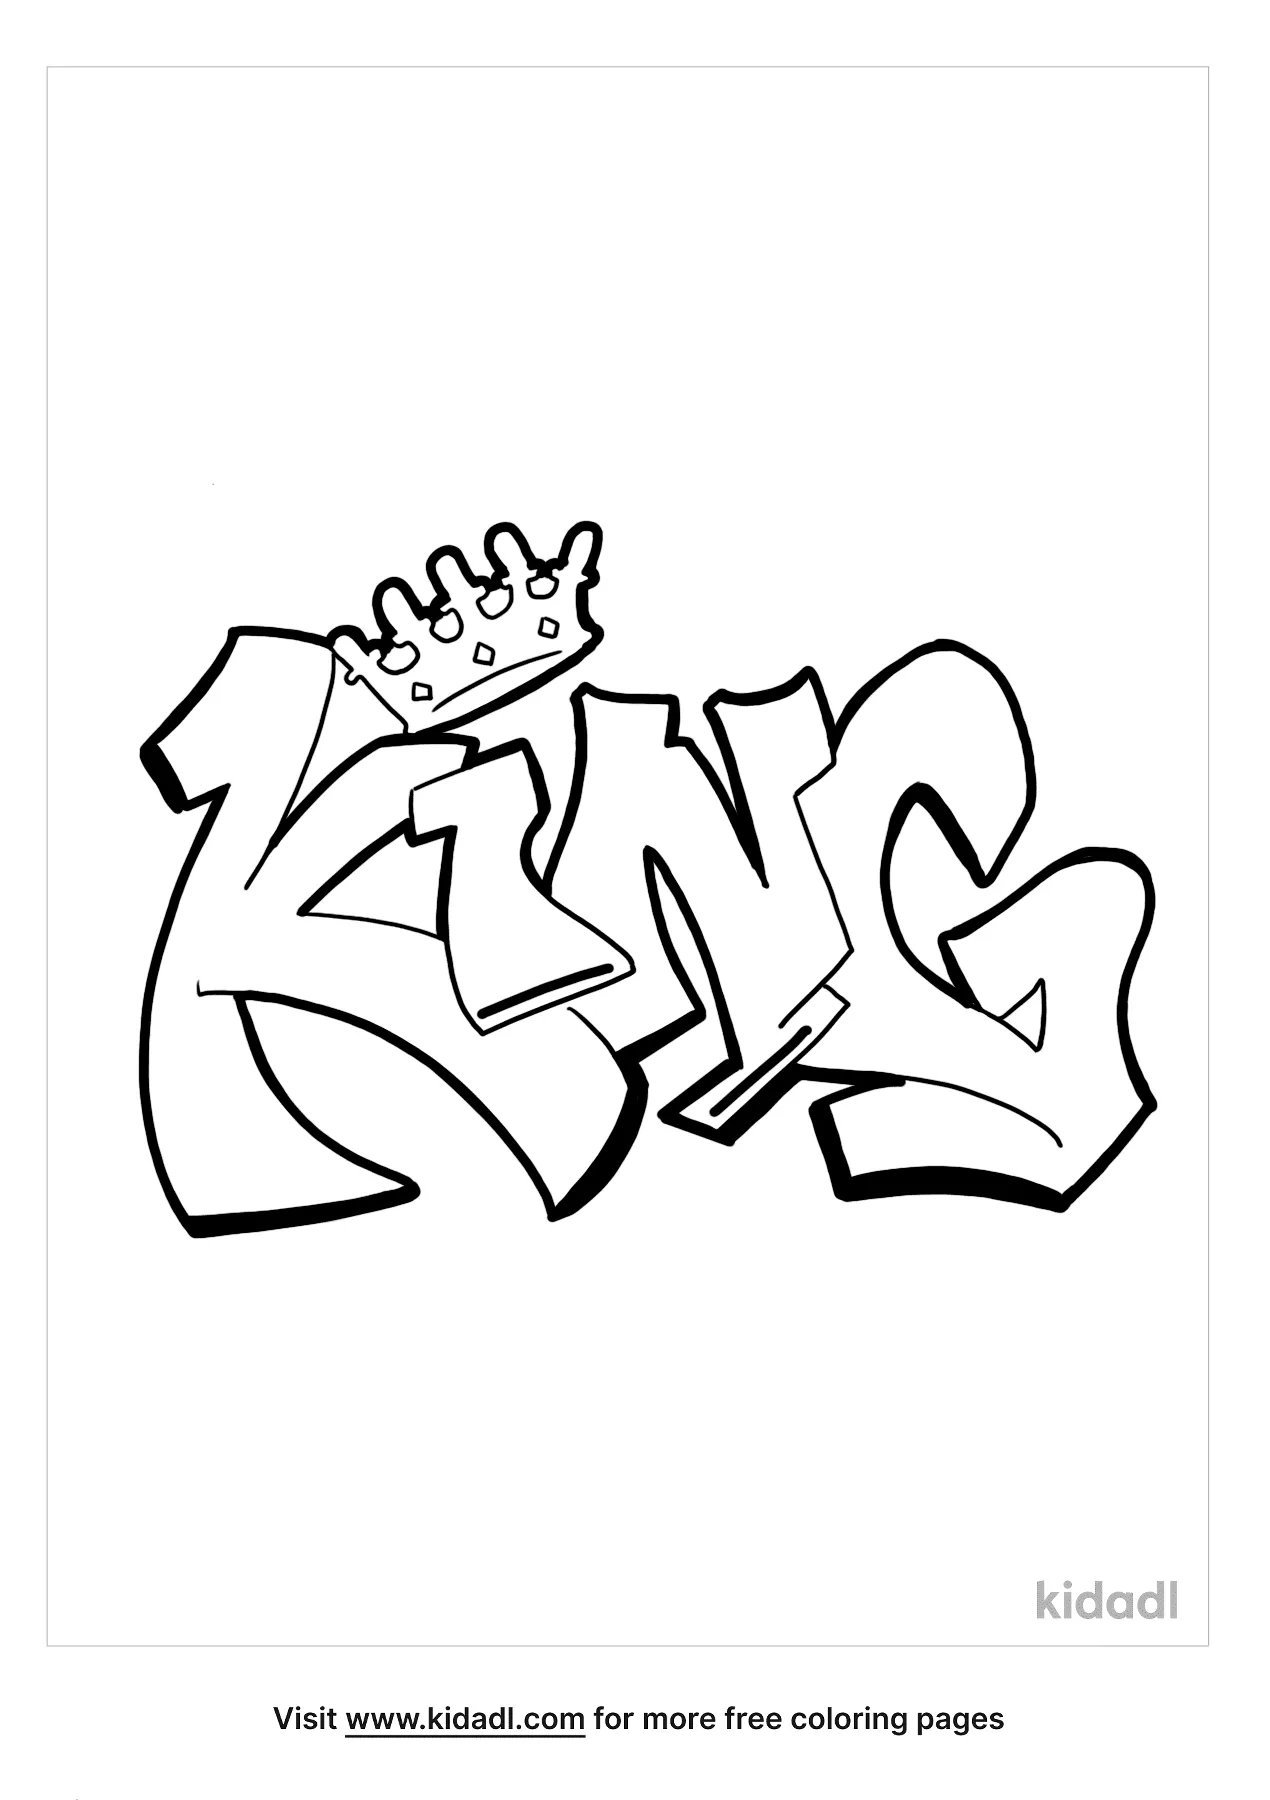 Graffiti Coloring Pages   Free Words and quotes Coloring Pages ...